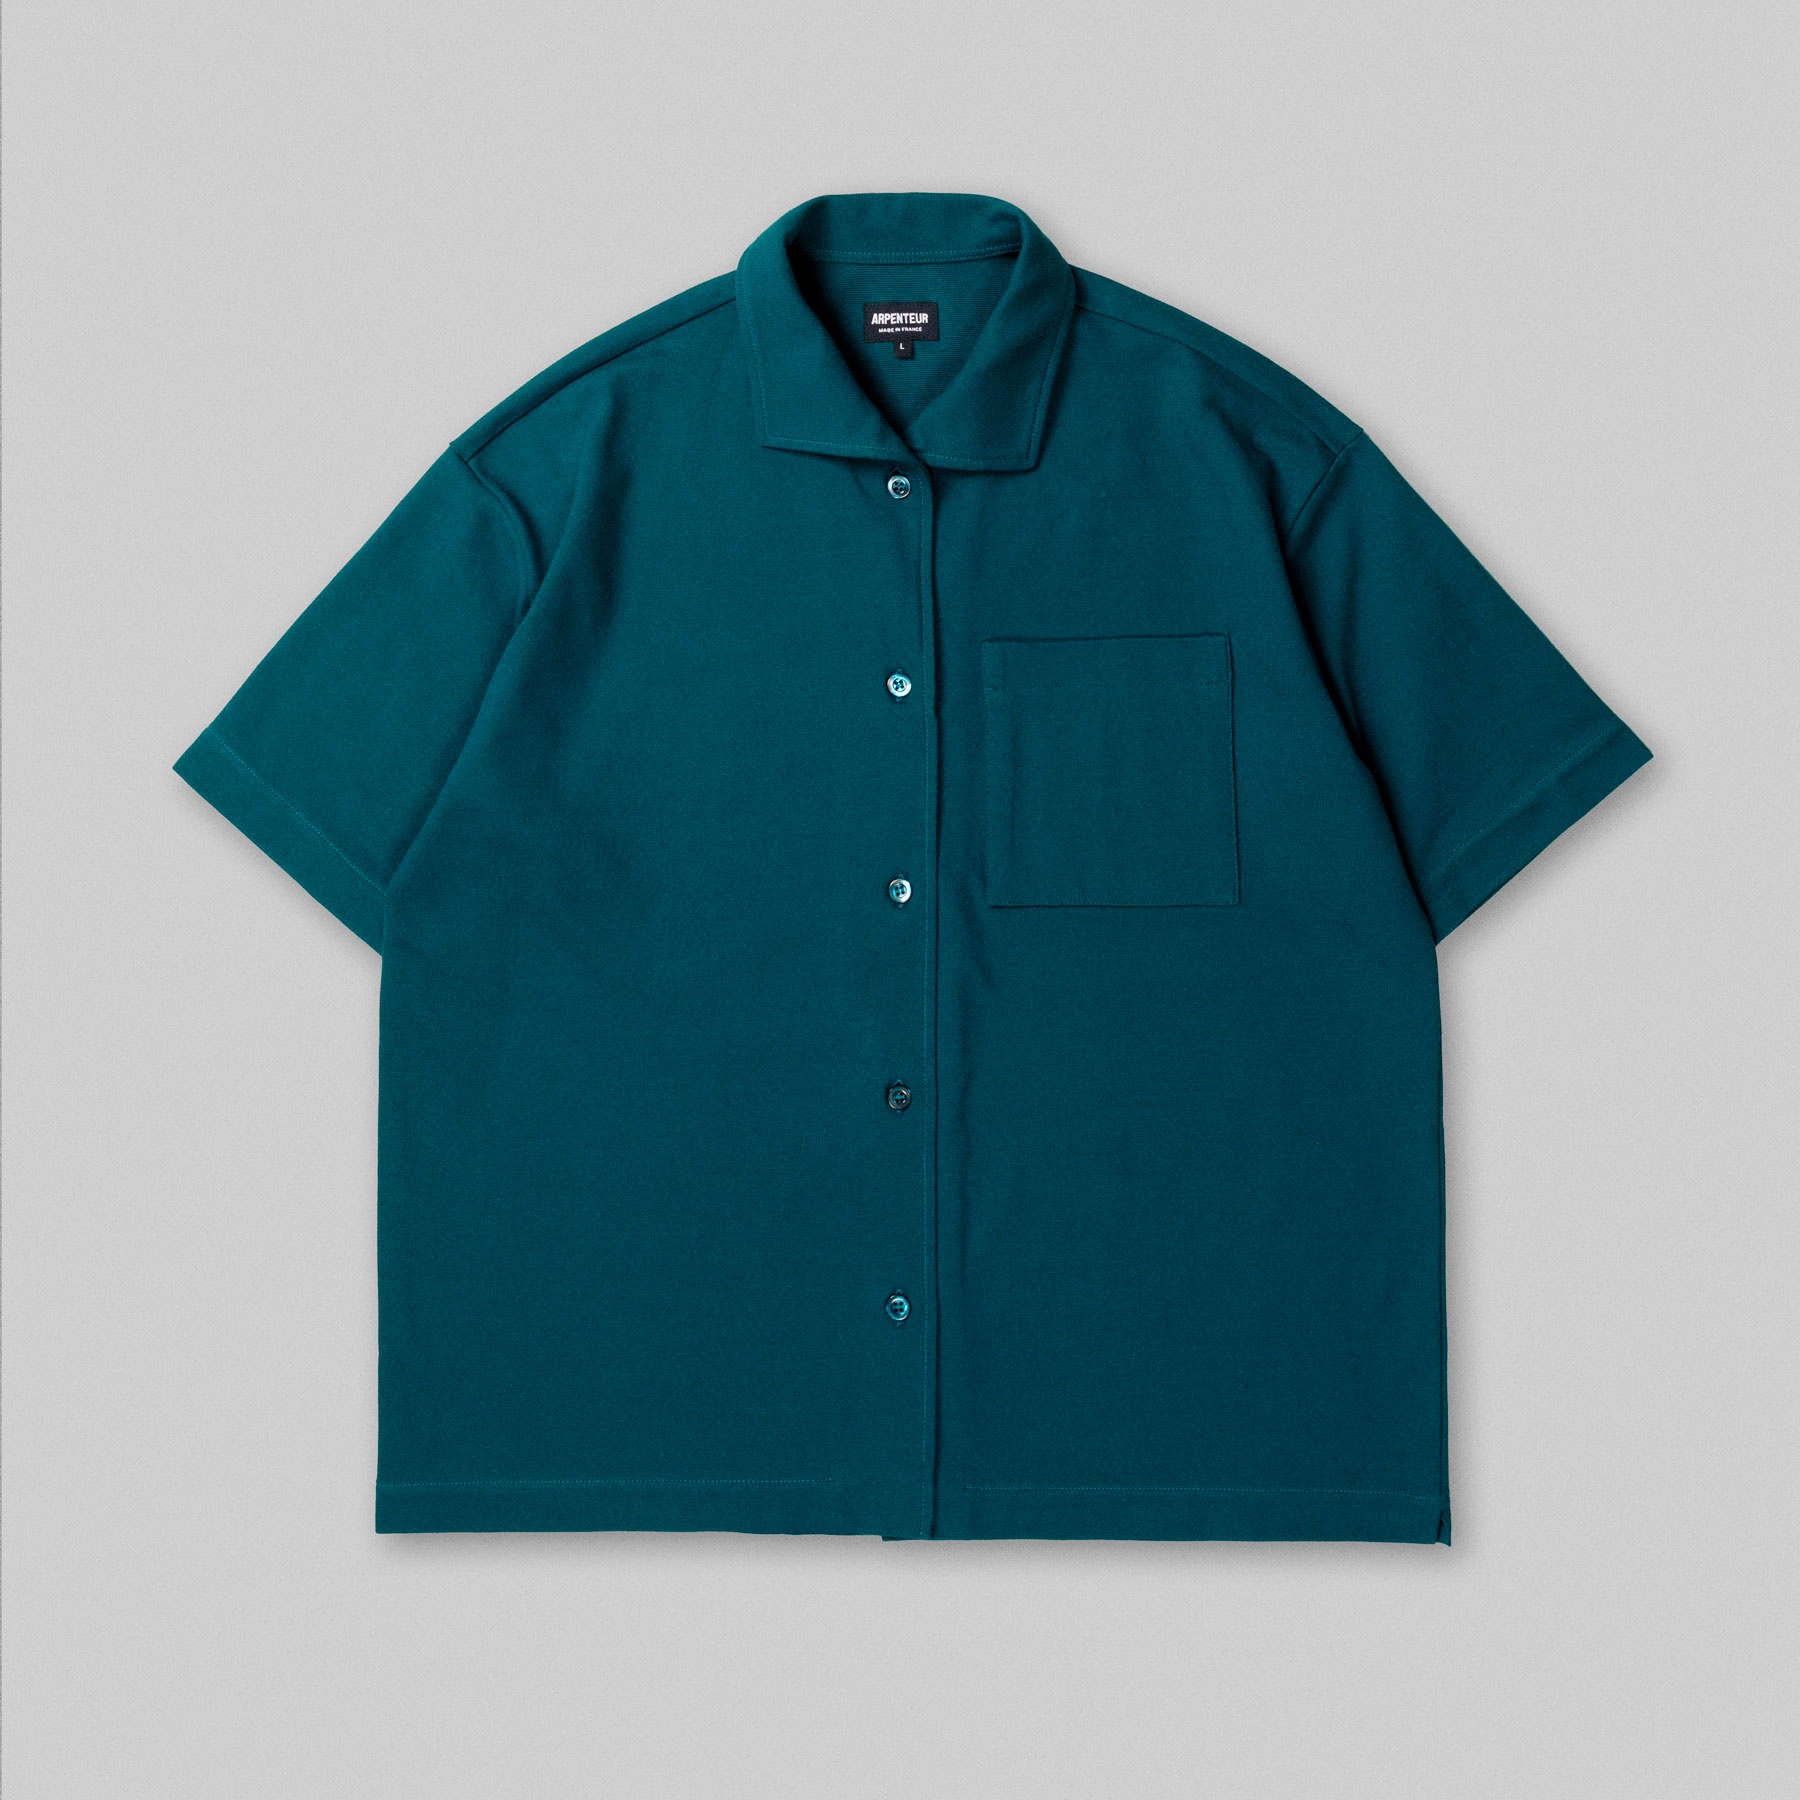 CORAL short sleeve shirt by Arpenteur in Peacock blue color